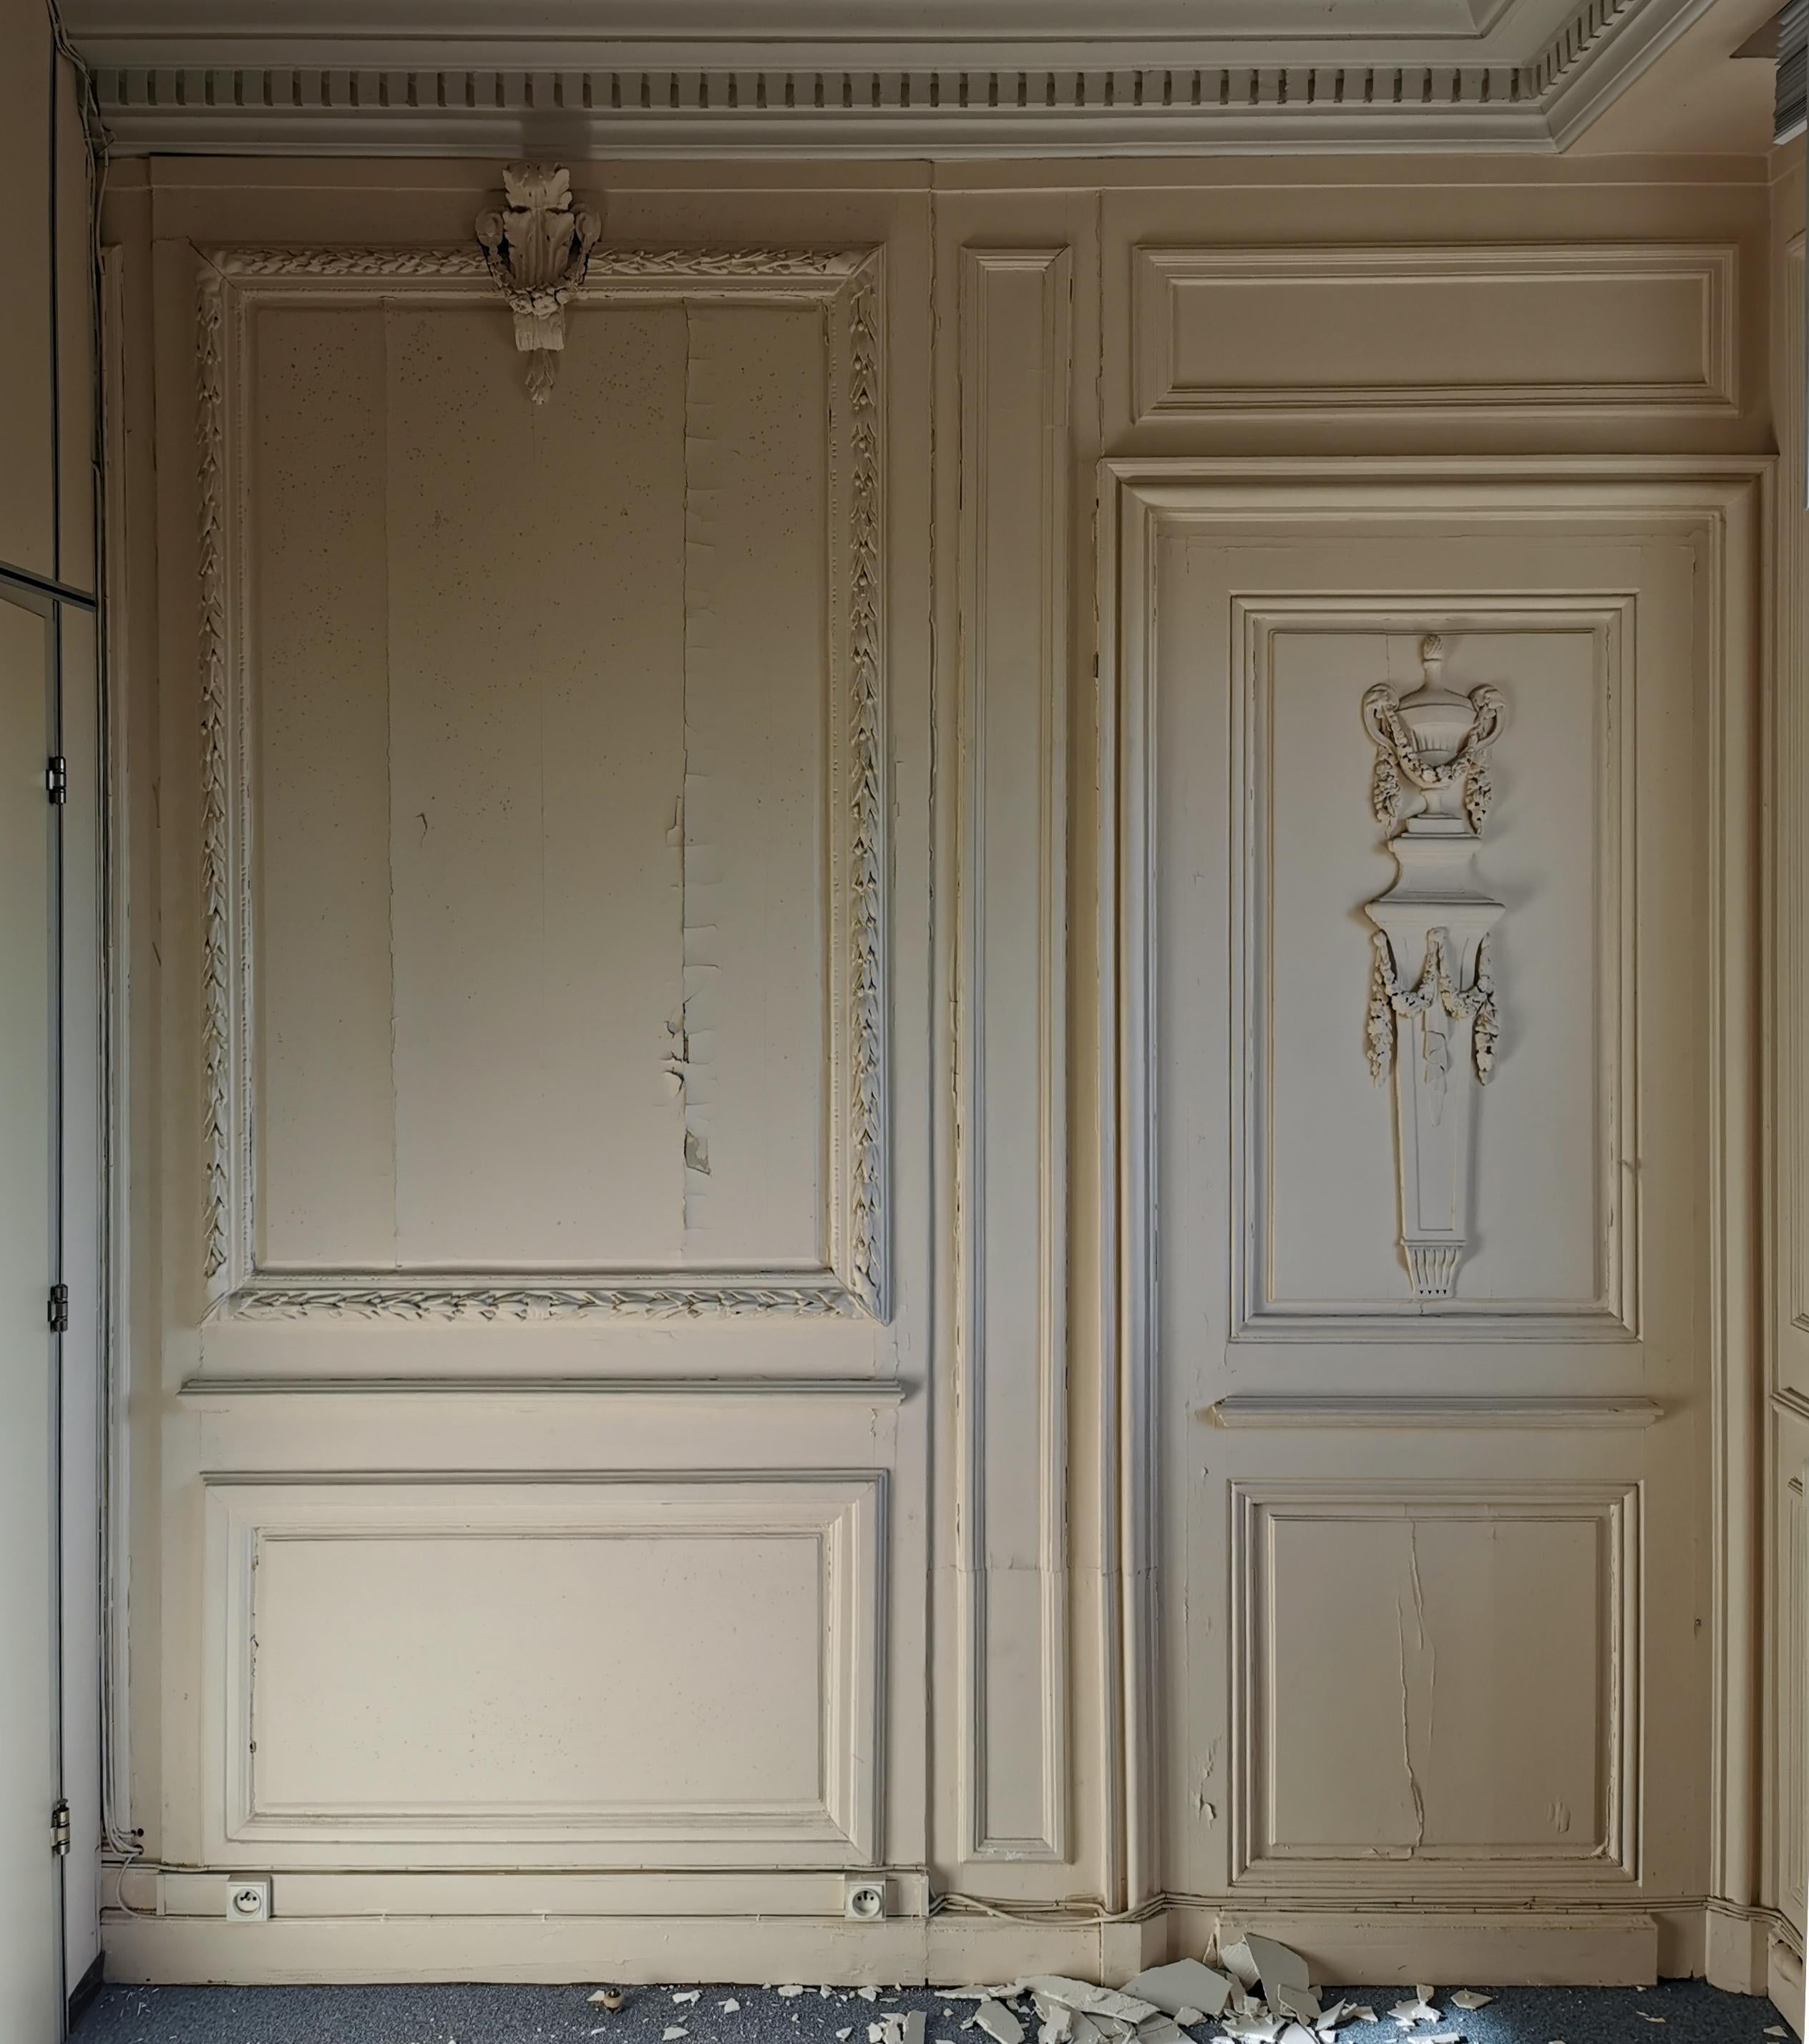 This beautiful paneled room is composed of elements from the Louis XVI period on a pine tree structure, some elements have been put on more recent frame from the 20th century beginning.
It shows a white painted paneled decor framed by olive tree